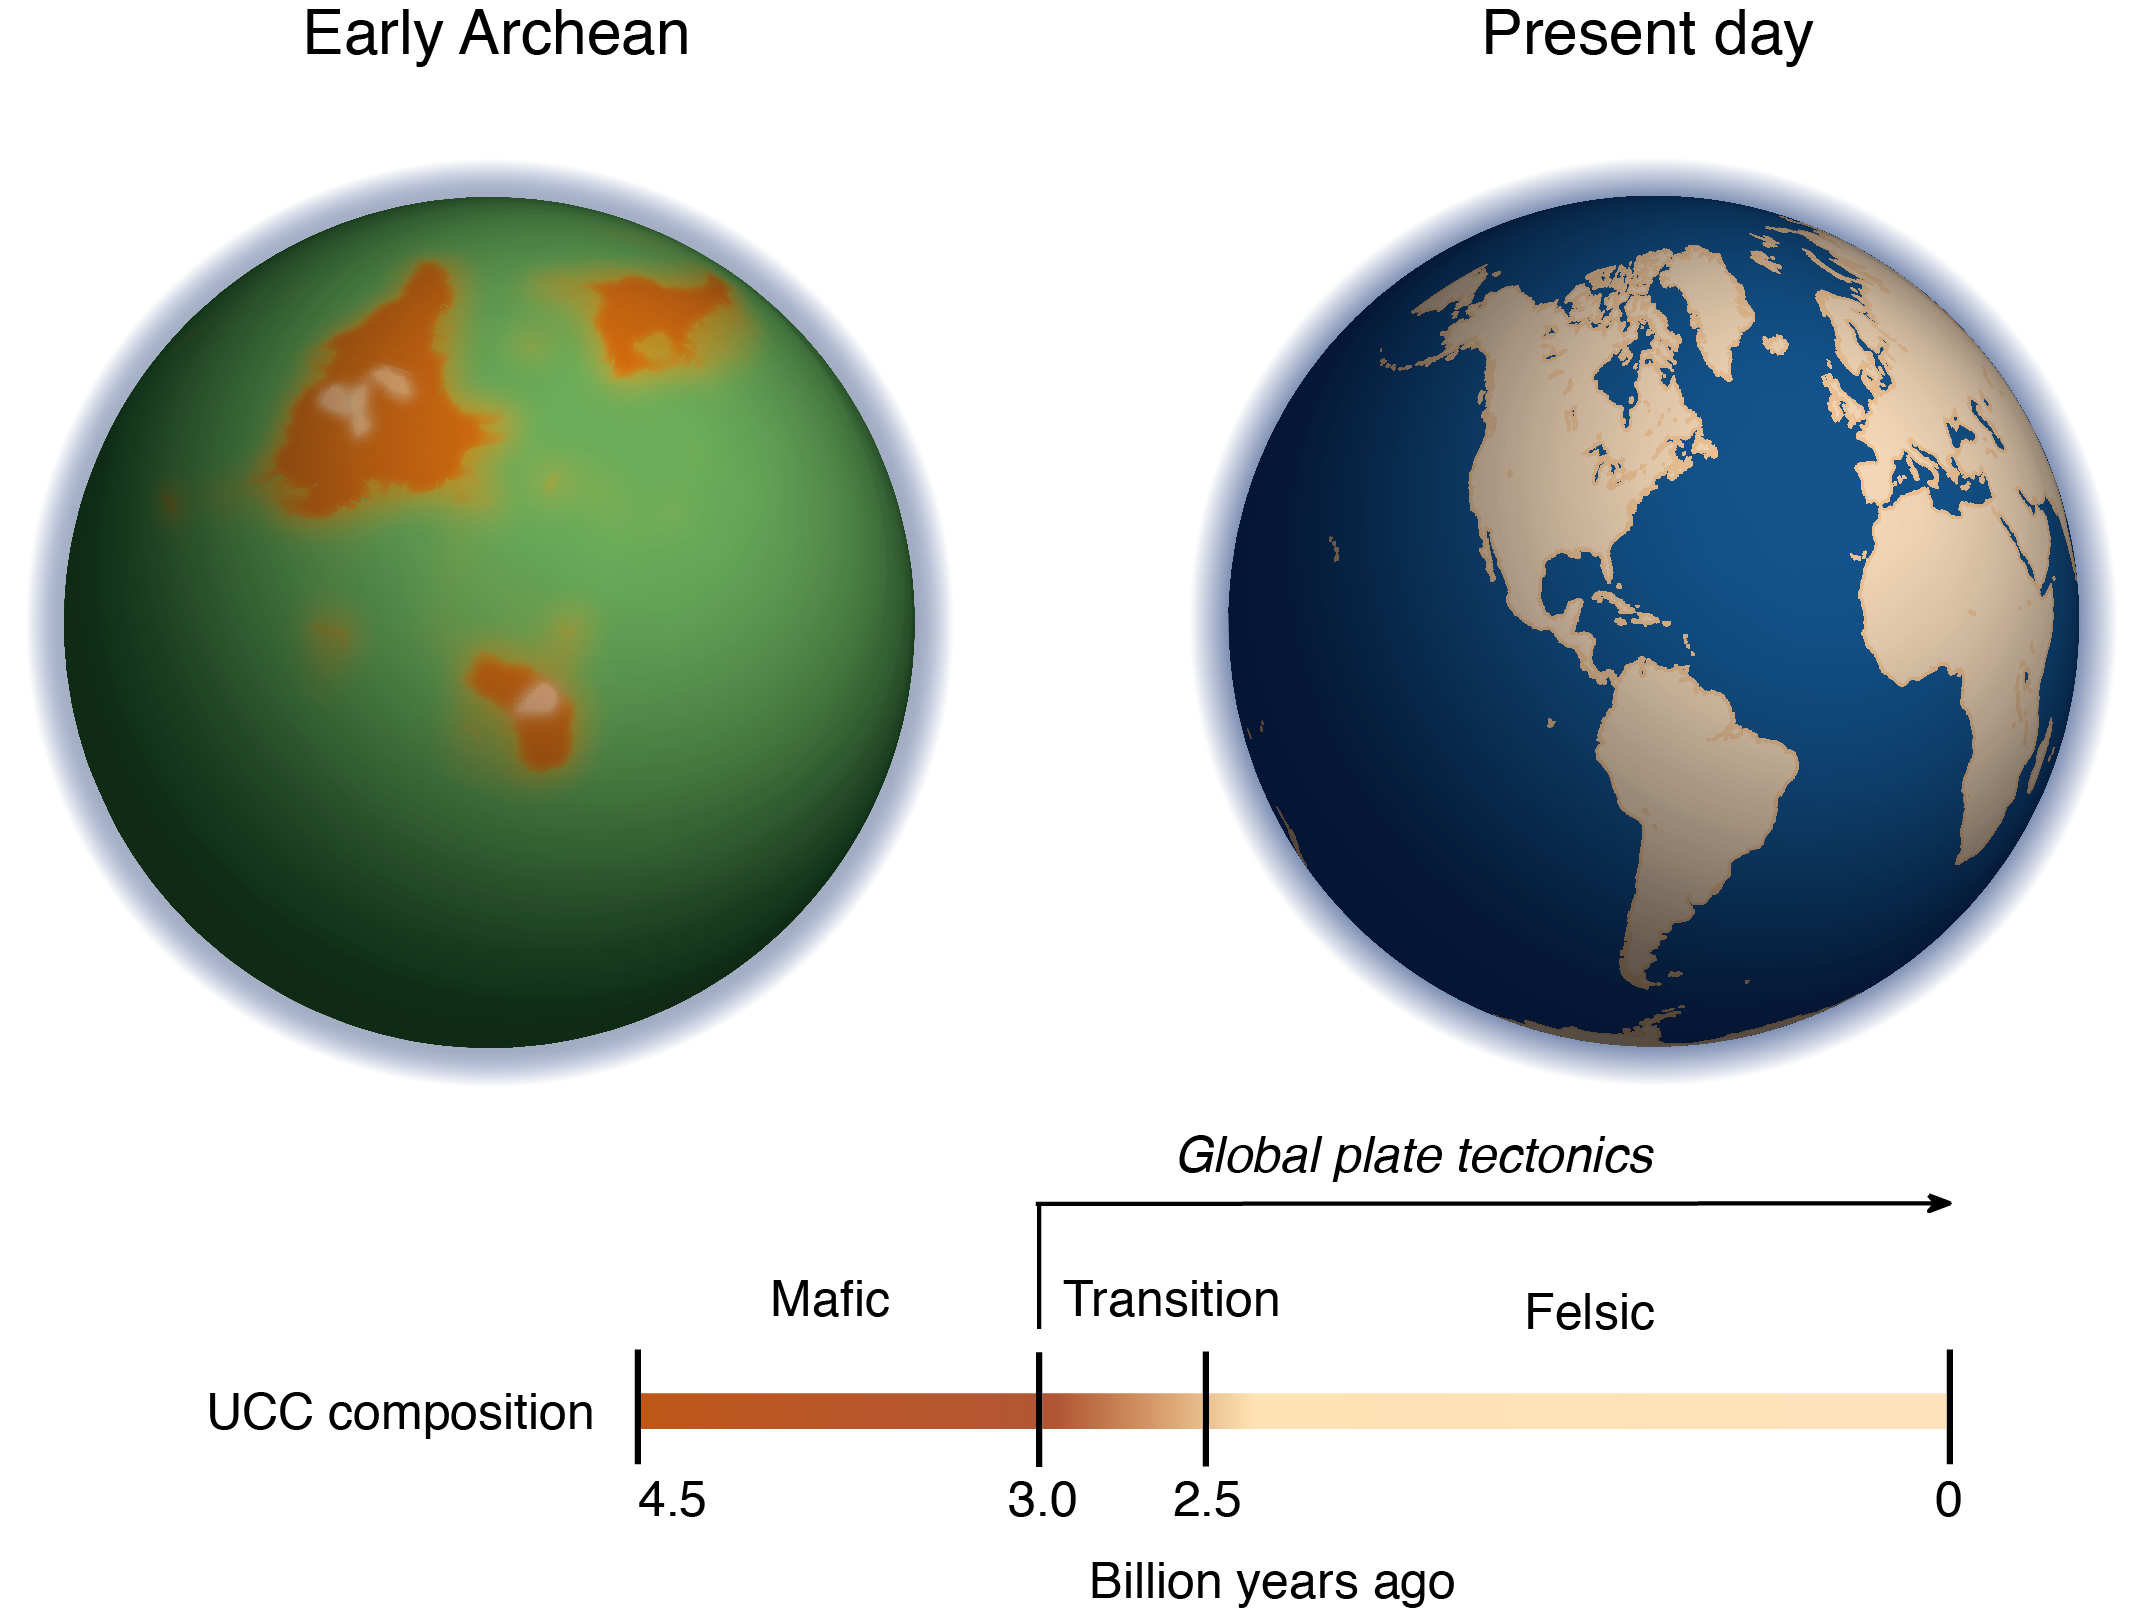 The image at left depicts what Earth might have looked like more than 3 billion years ago in the early Archean. The orange shapes represent the magnesium-rich proto-continents before plate tectonics started—although it is impossible to determine their precise shapes and locations. The ocean appears green due to a high amount of iron (Fe[II]) ions in the water at that time. The timeline traces the transition from a magnesium-rich (mafic) upper continental crust (UCC) to a magnesium-poor (felsic) UCC. Image credit: Ming Tang/UMD (click image to download hi-res version.)